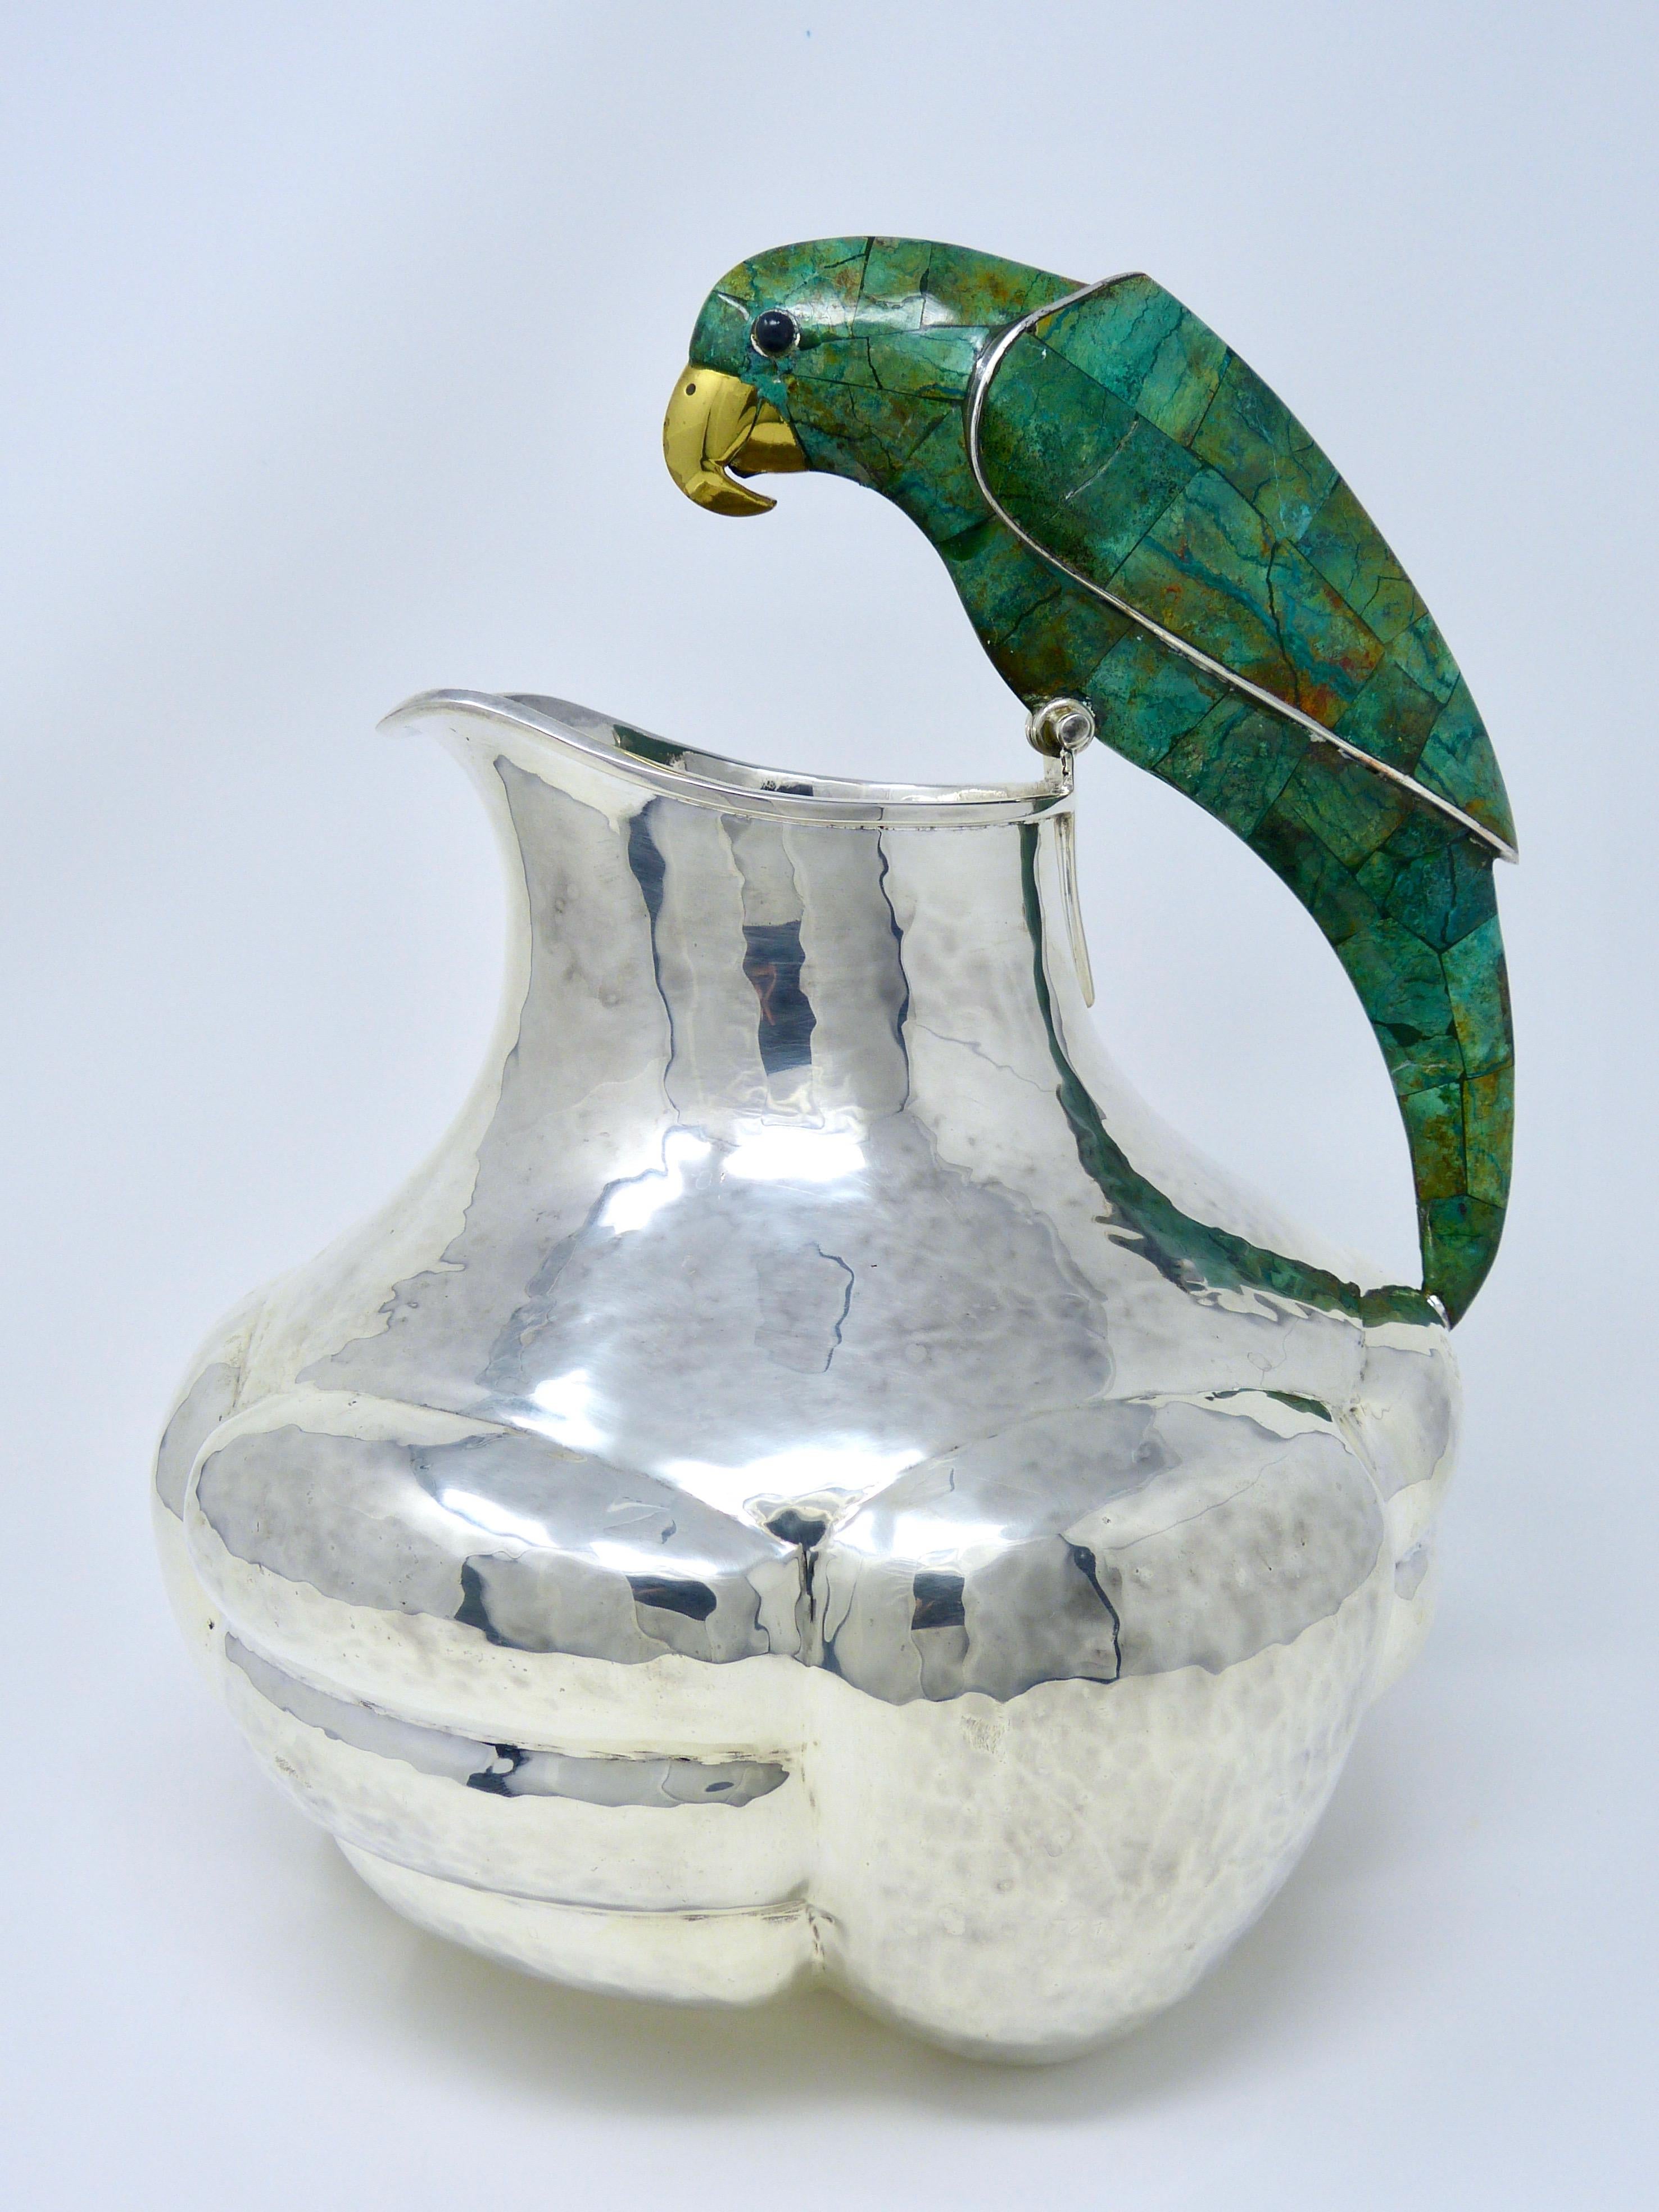 Vintage Emilia Castillo silver plated and malachite water pitcher with parrot
hand-hammered
Made in Taxco, México, late 20th century
Weight 4.47 Lbs.